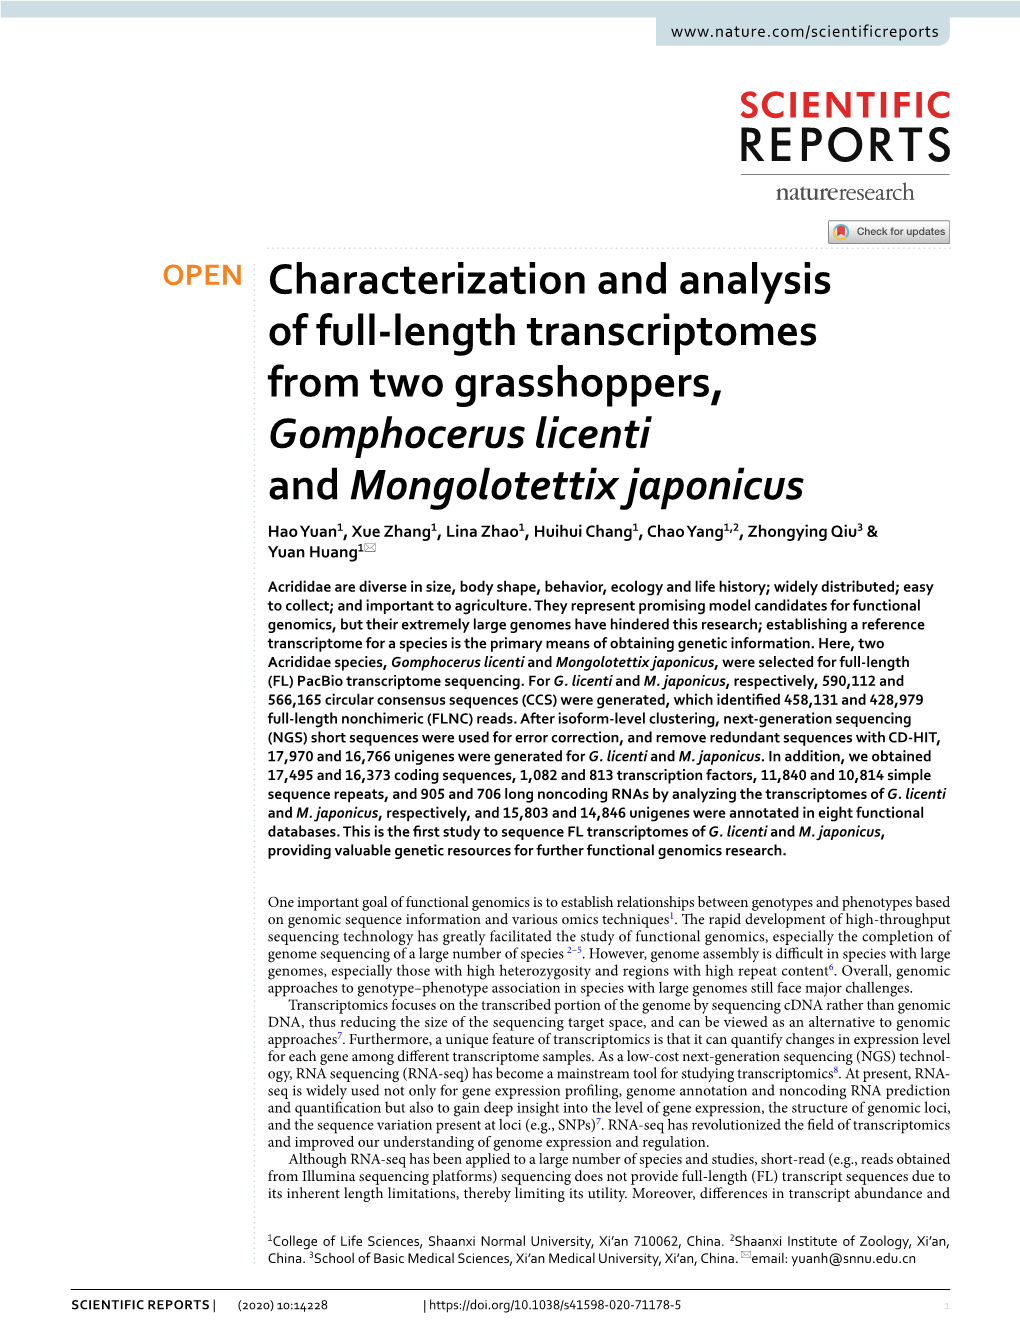 Characterization and Analysis of Full-Length Transcriptomes from Two